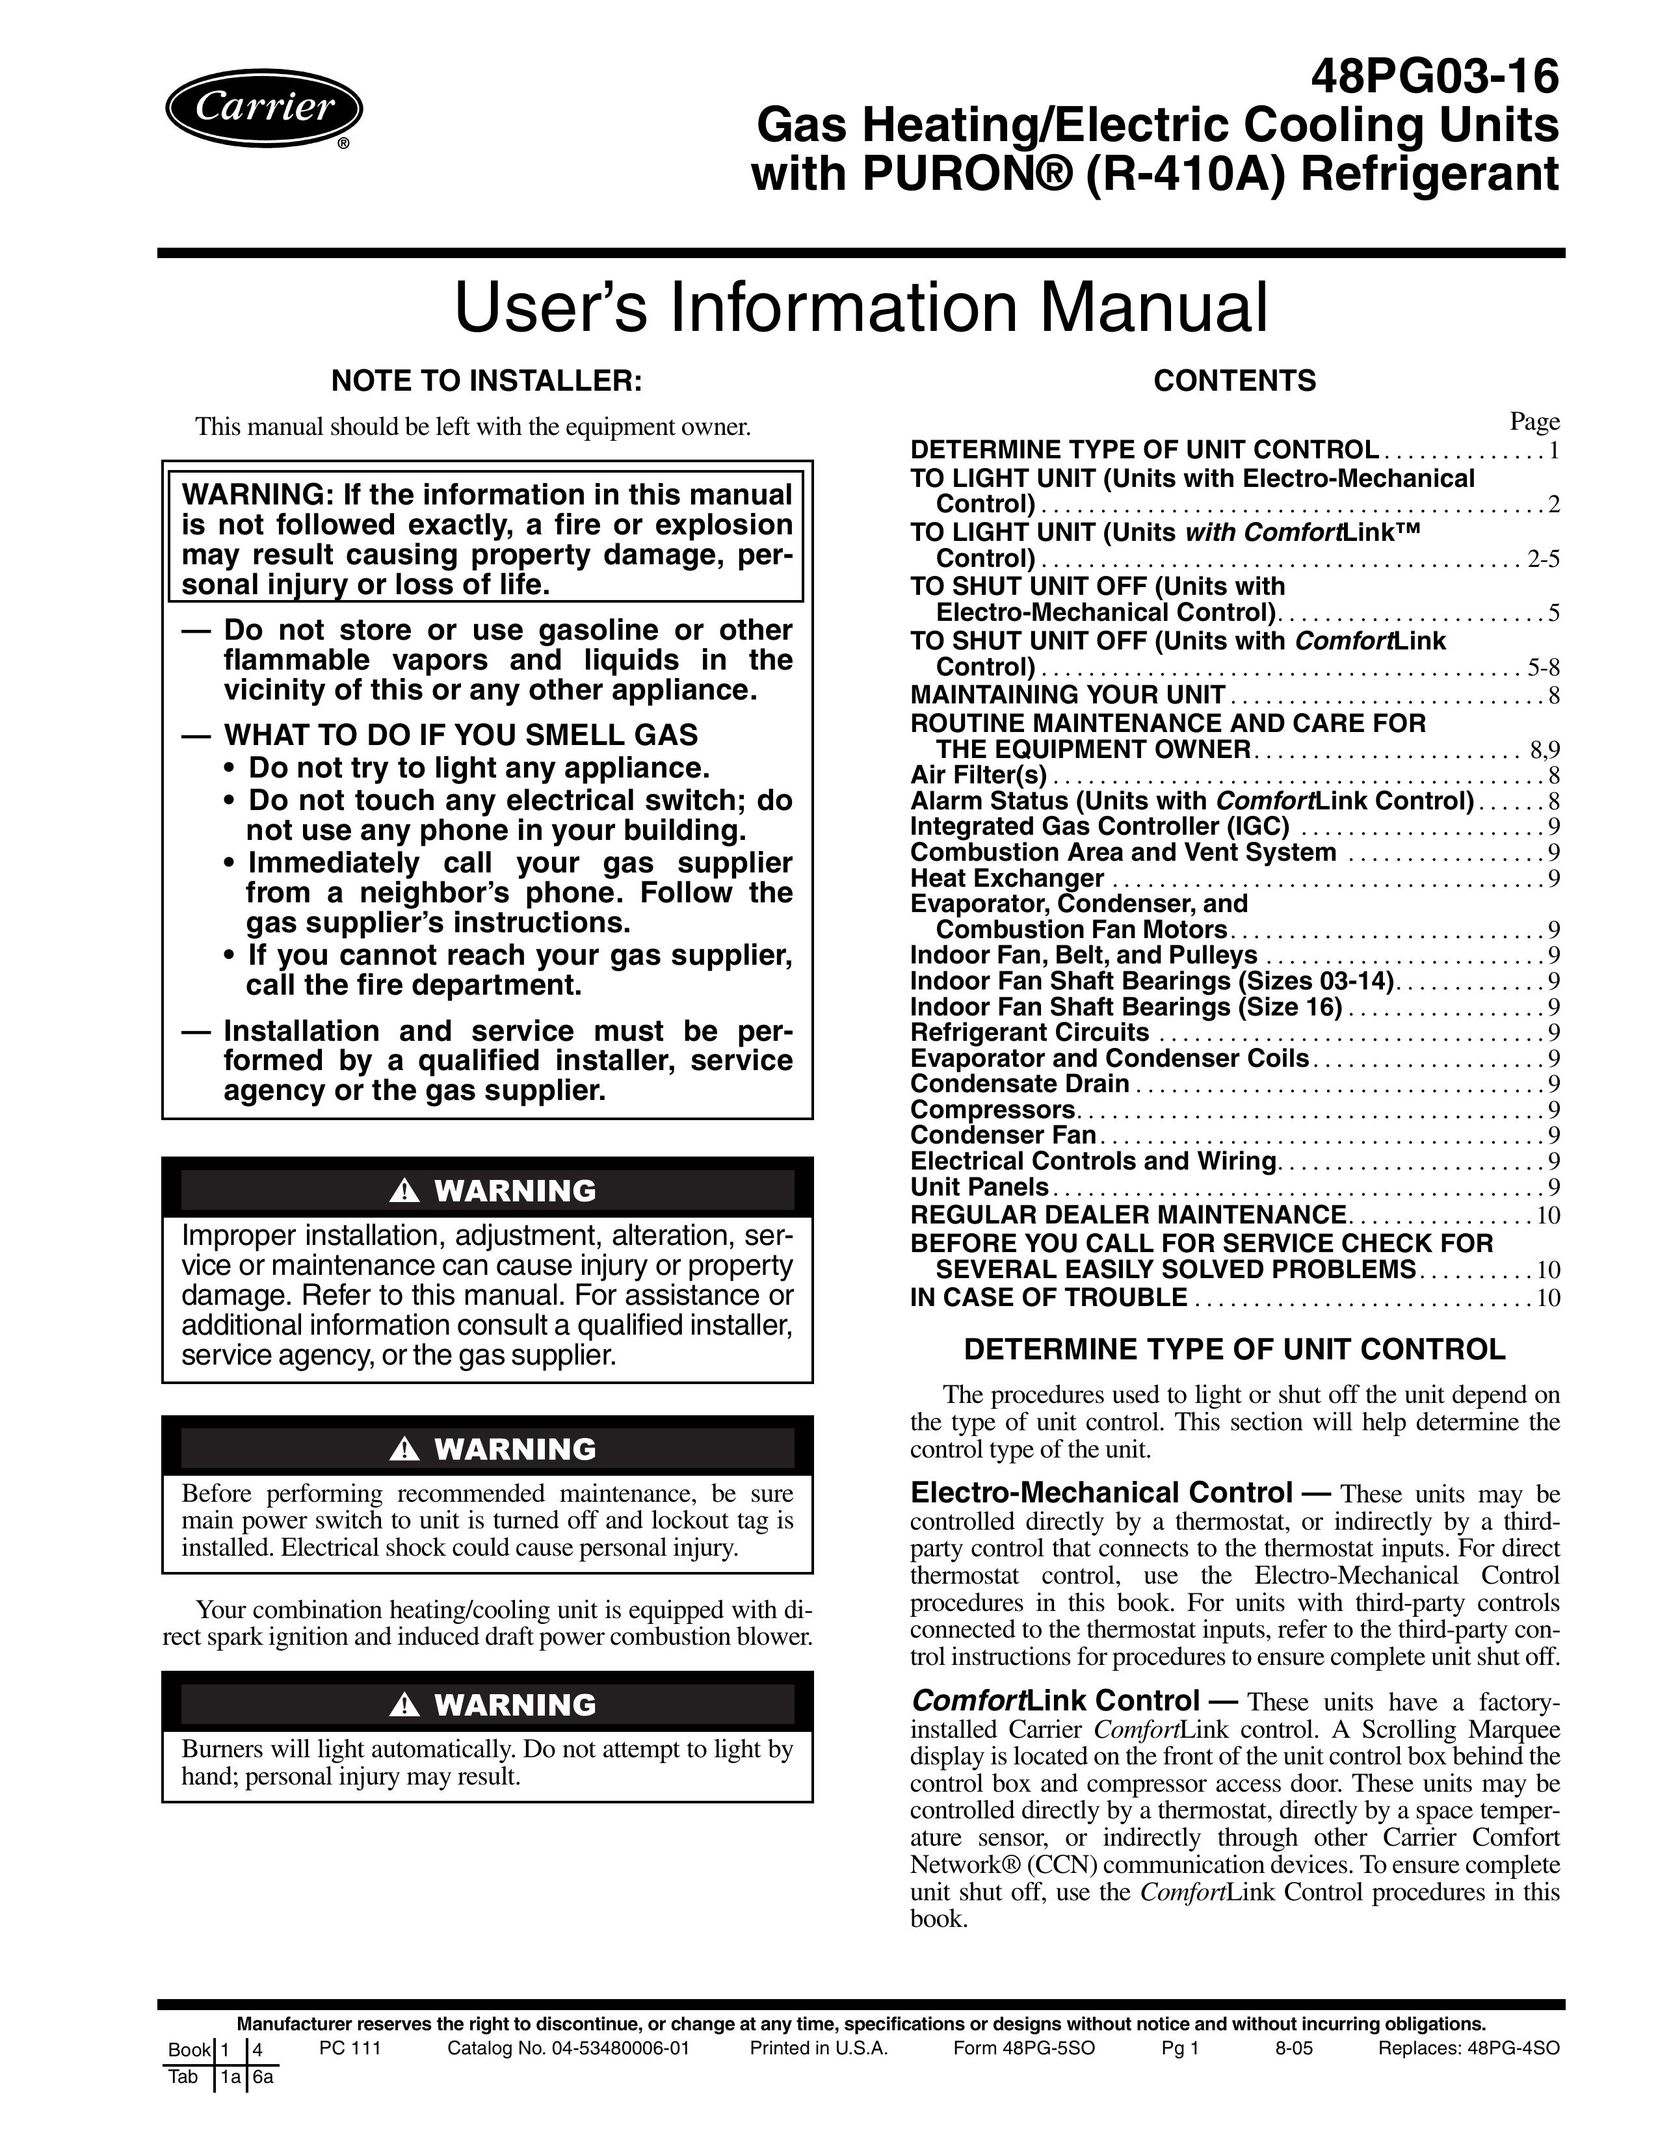 Carrier 48PG03---16 Heating System User Manual